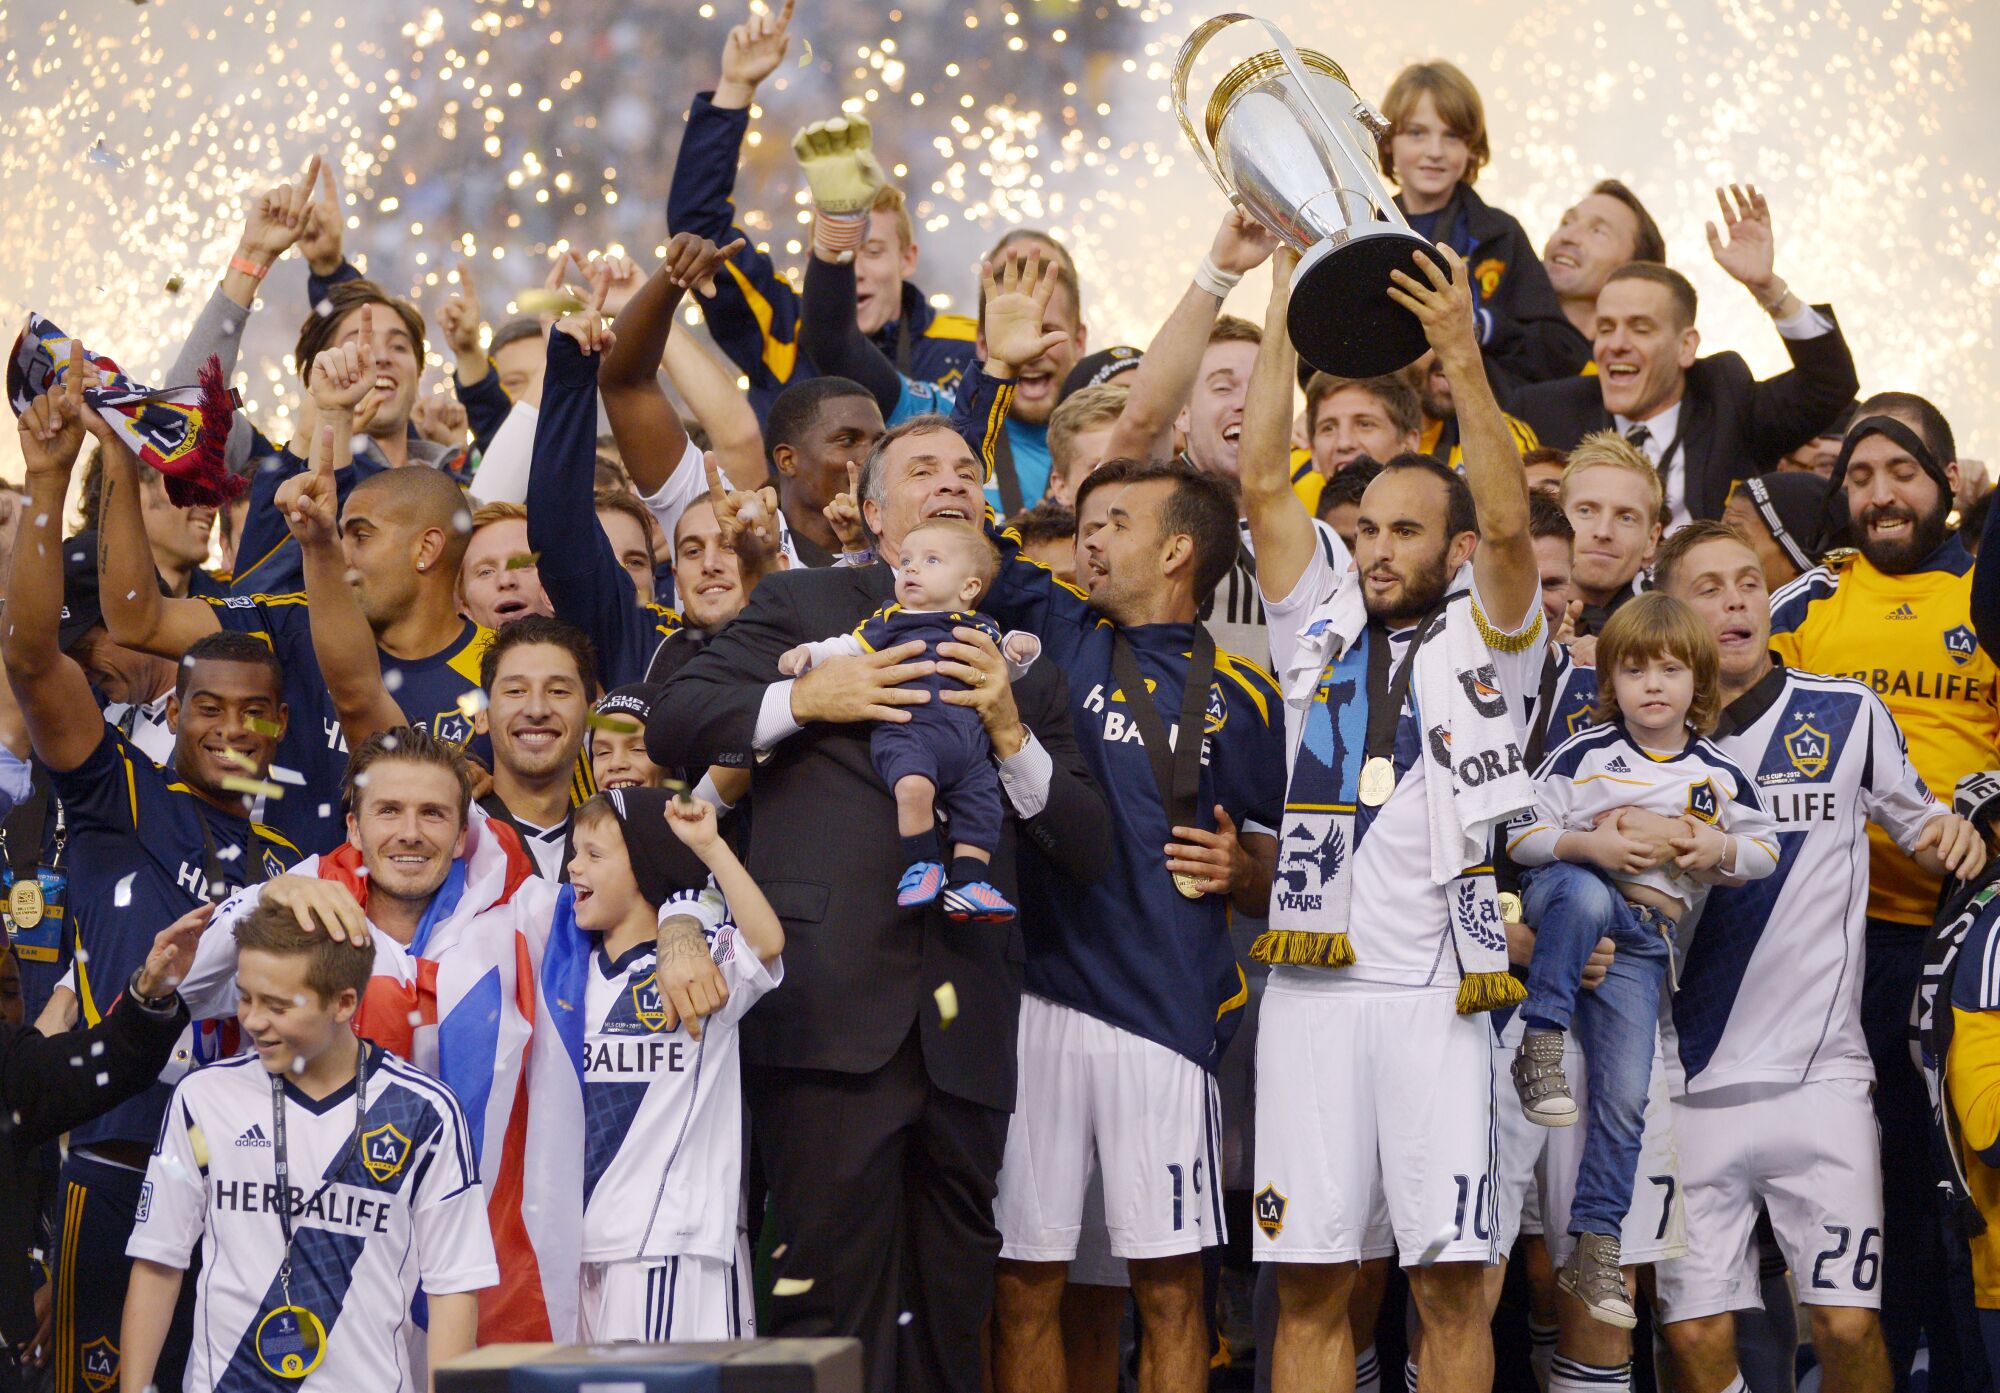 The Galaxy, including coach Bruce Arena, center, Landon Donovan and David Beckham celebrate winning the MLS Cup 